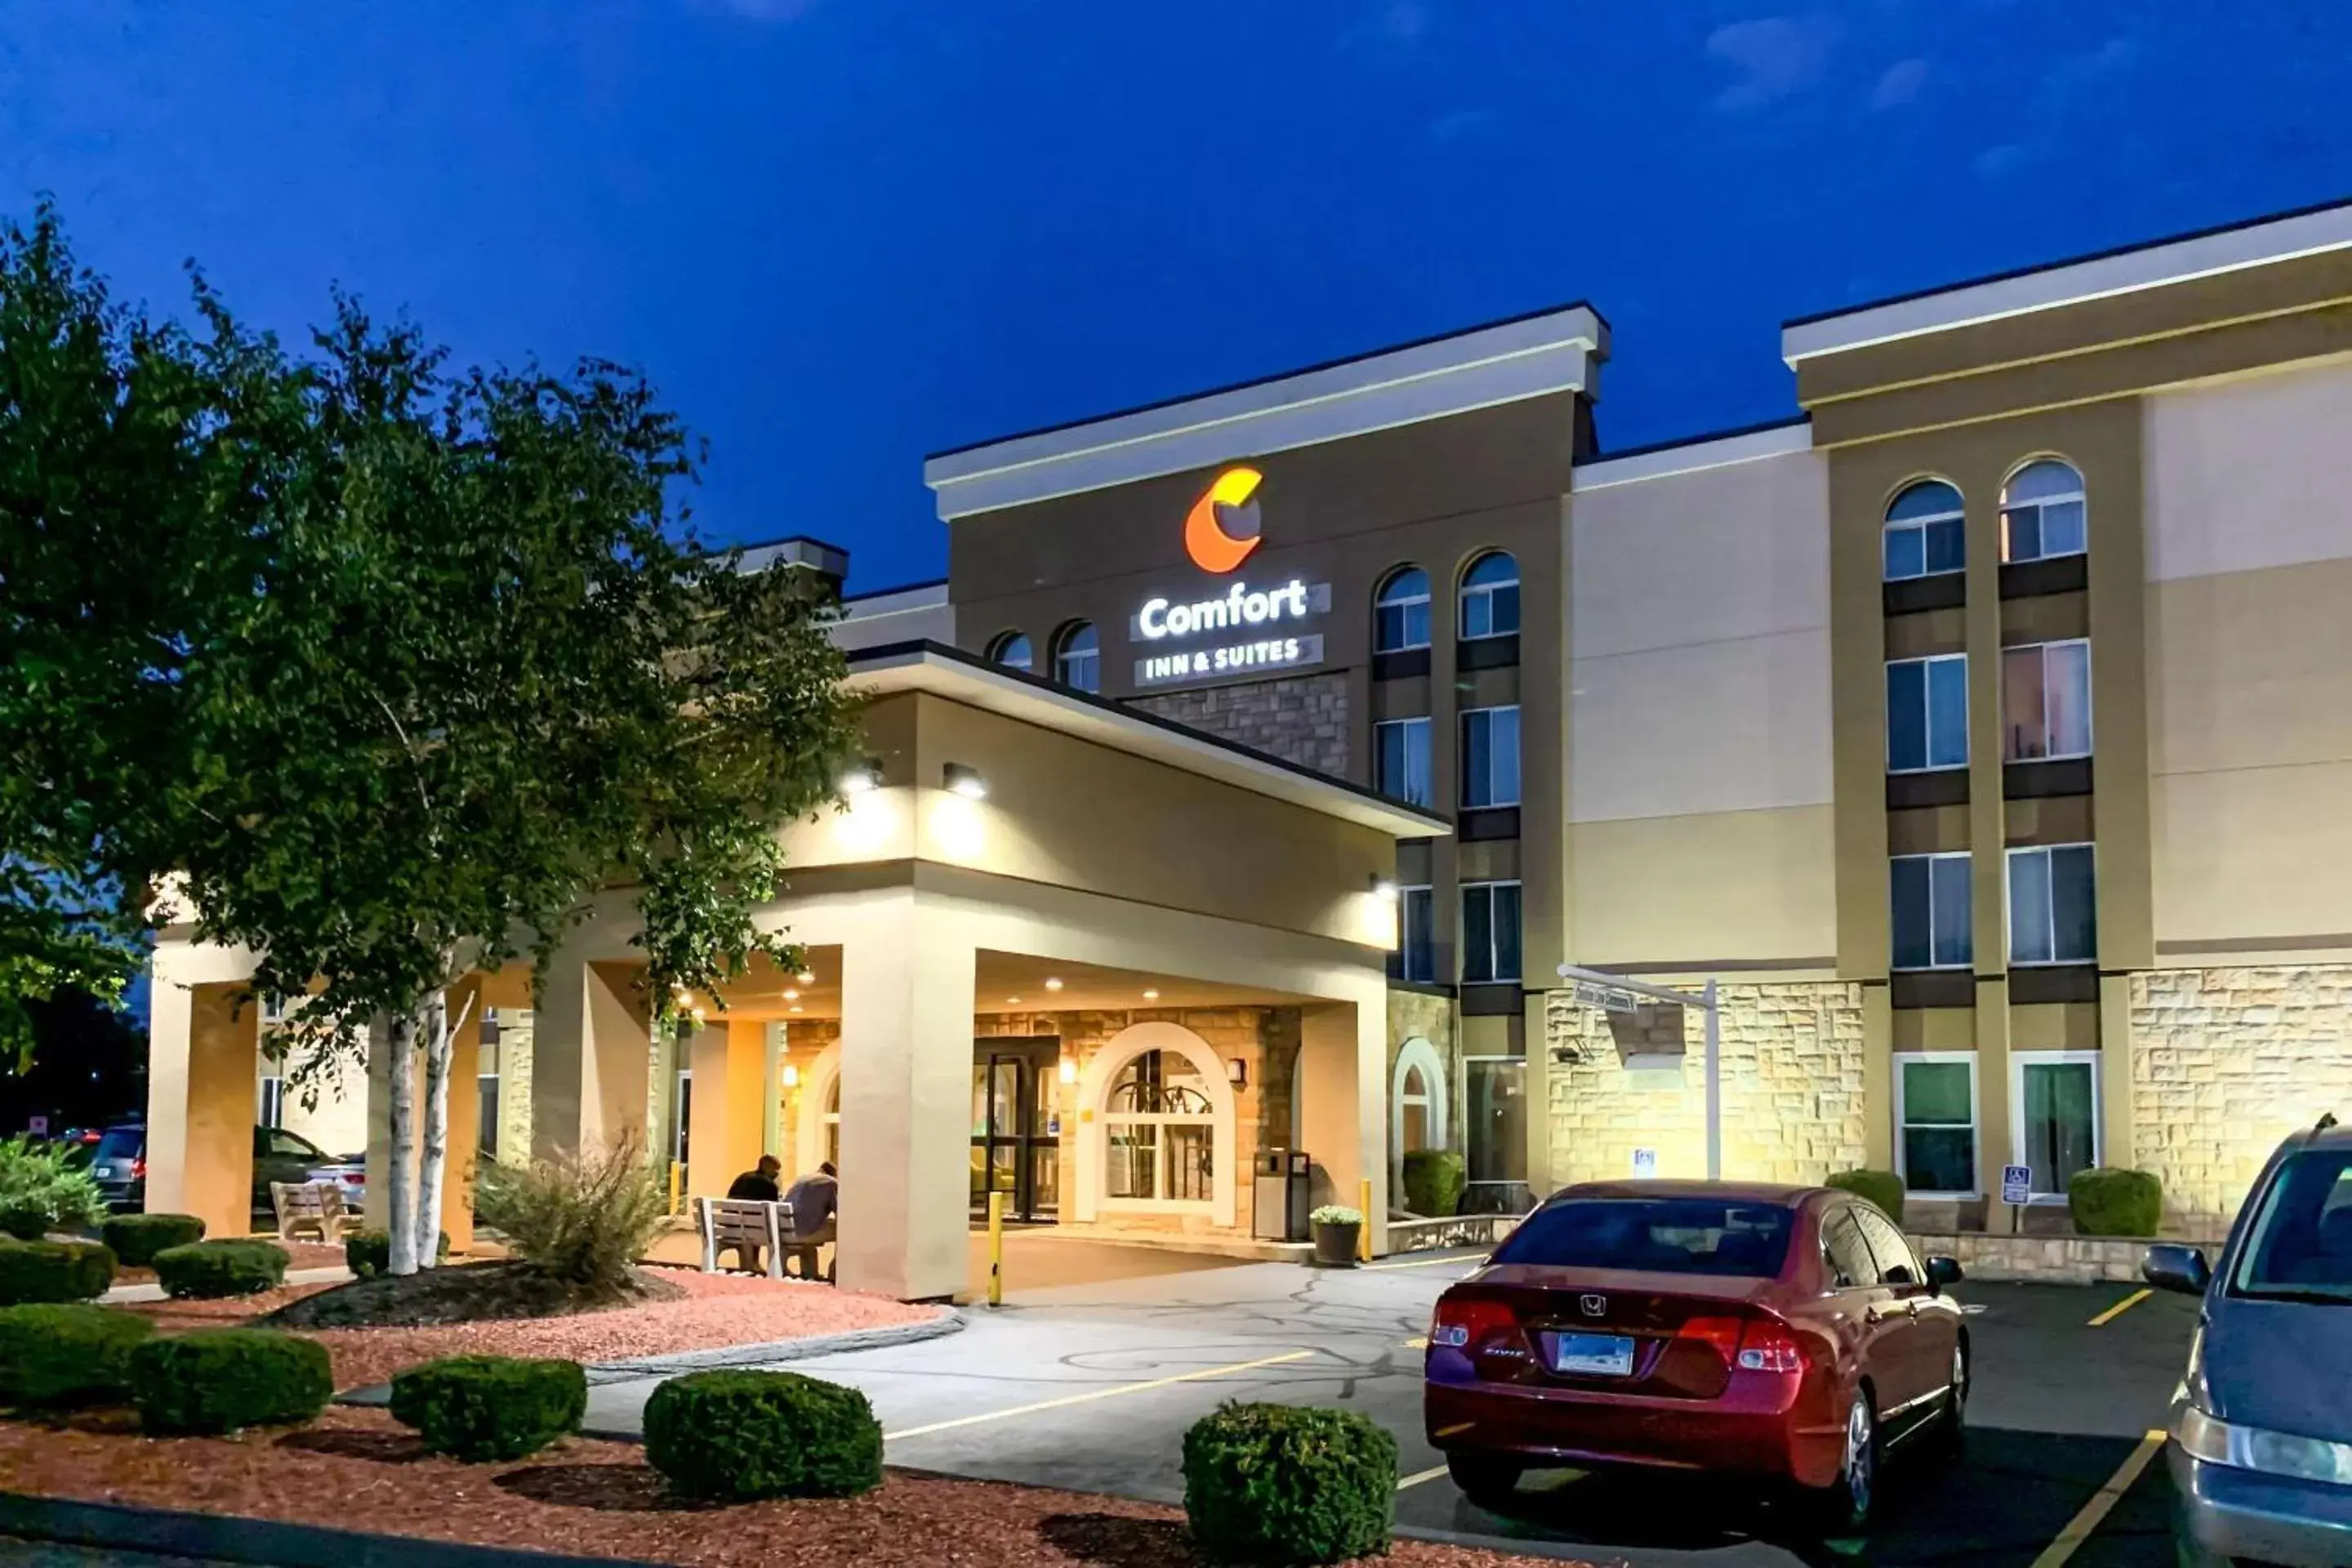 Property building in Comfort Inn and Suites East Hartford